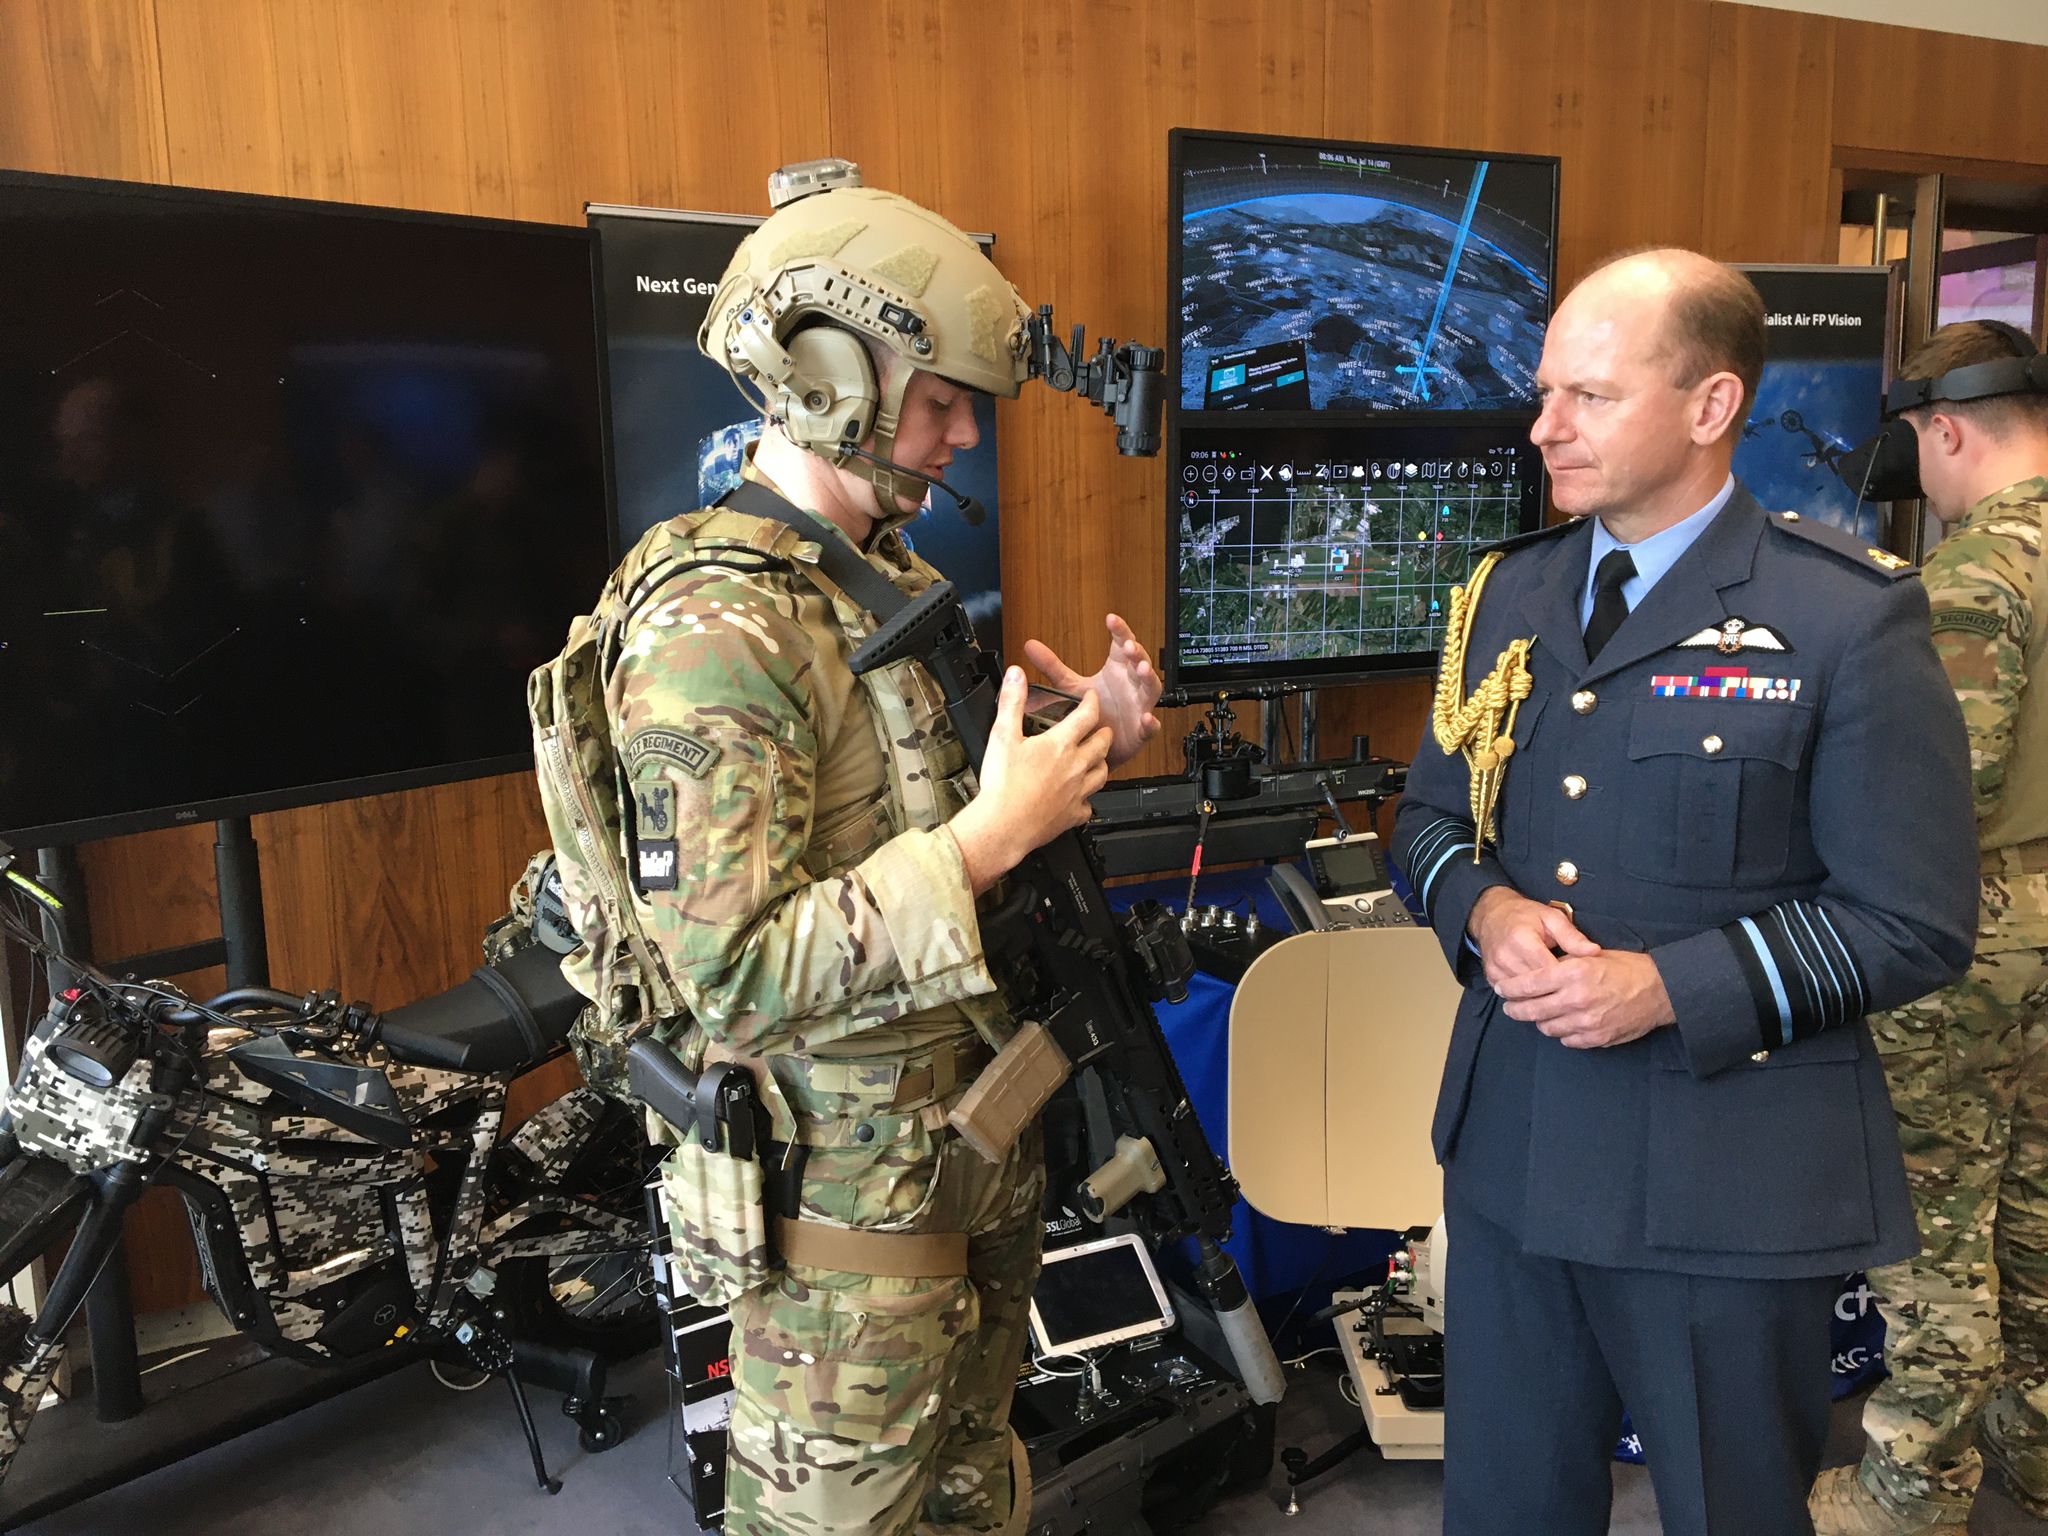 Image shows the Chief of the Air Staff talking with aviators. Room also has motorbike, technology gadgets, and computer screen too.